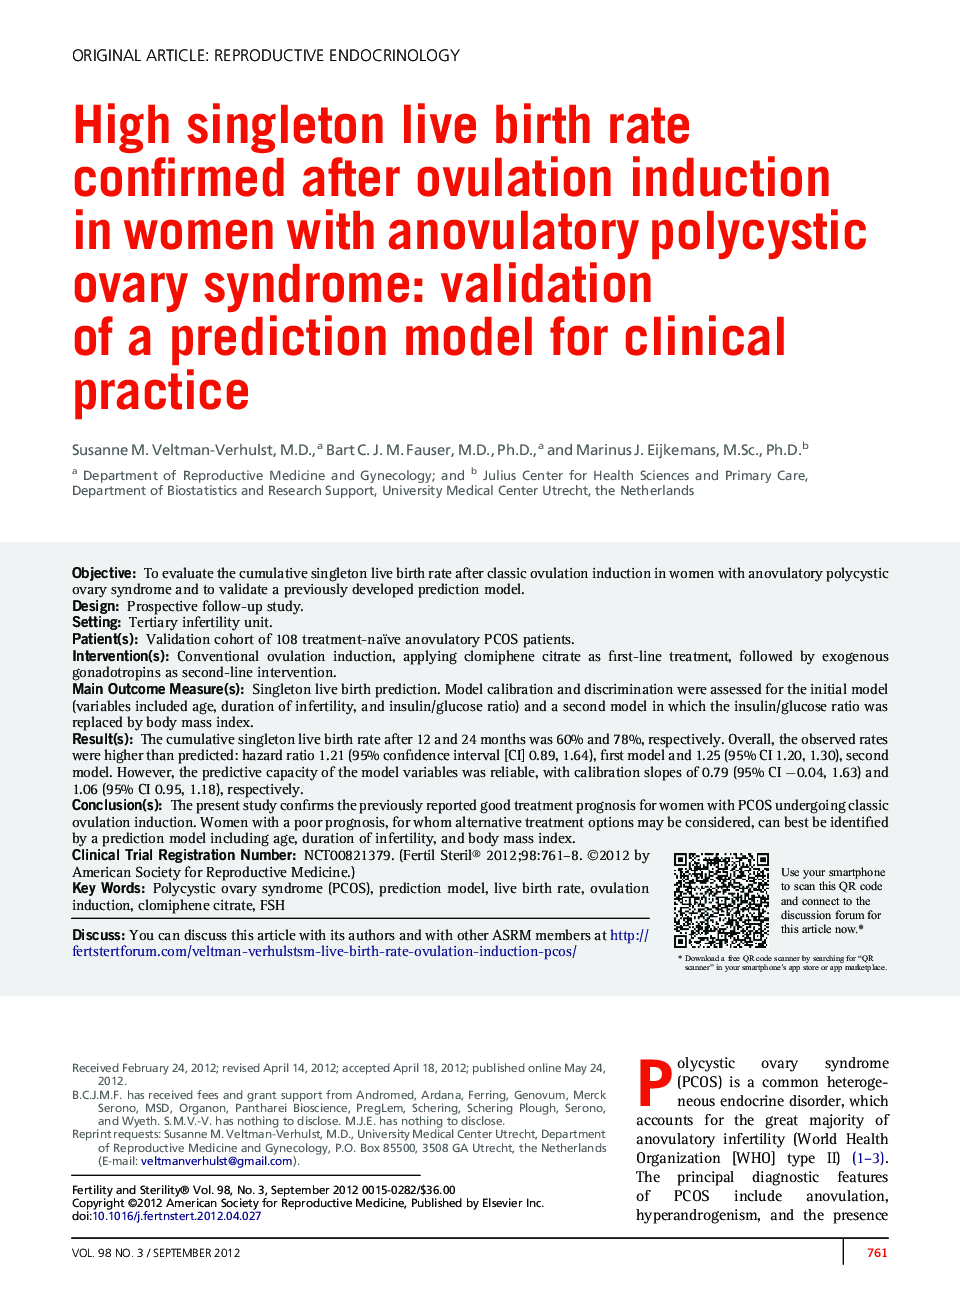 High singleton live birth rate confirmed after ovulation induction in women with anovulatory polycystic ovary syndrome: validation of a prediction model for clinical practice